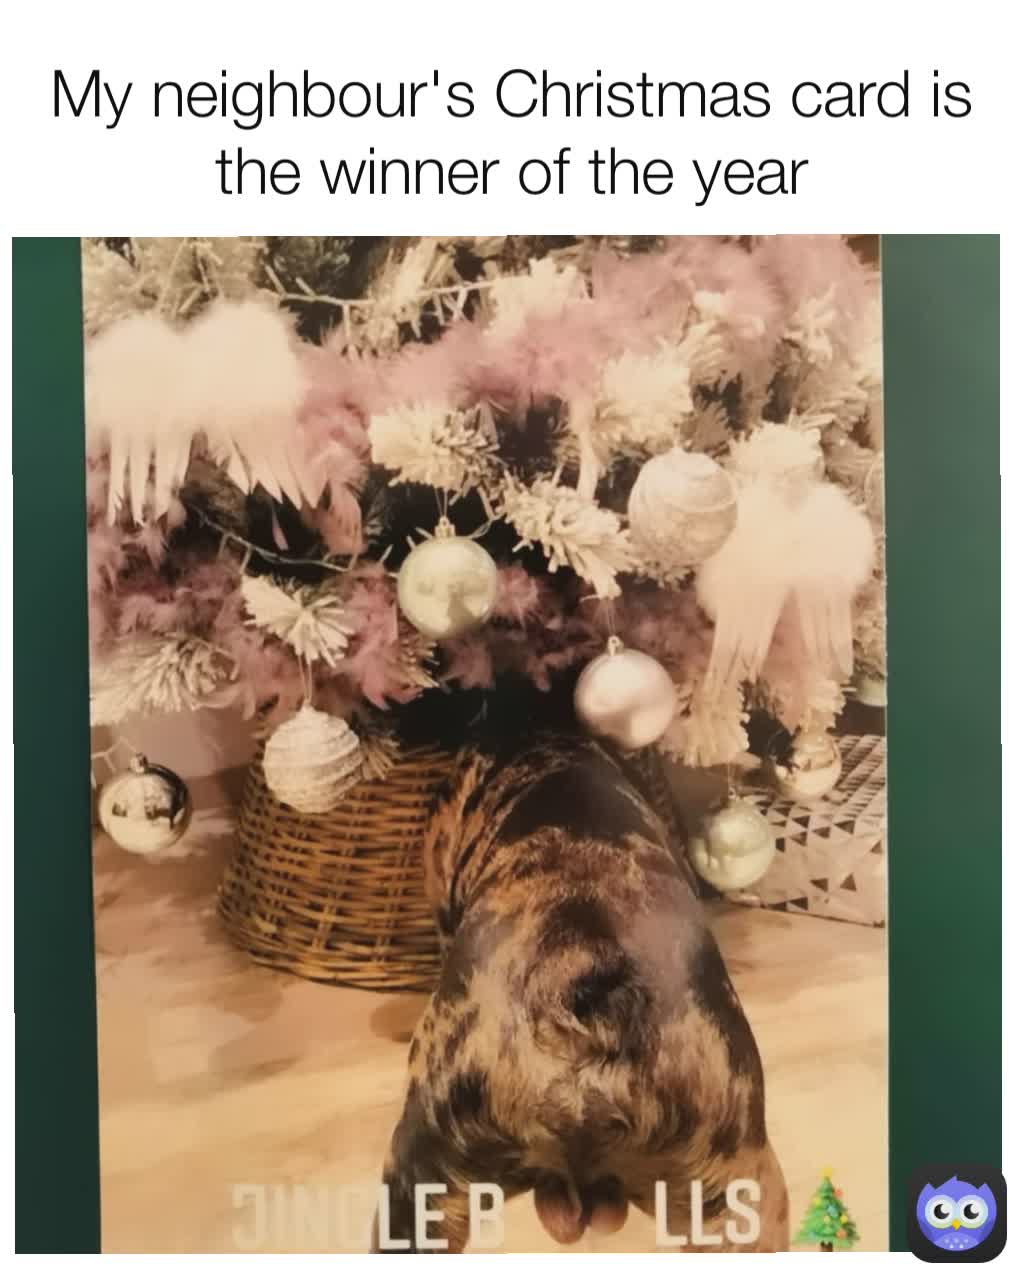 My neighbour's Christmas card is the winner of the year